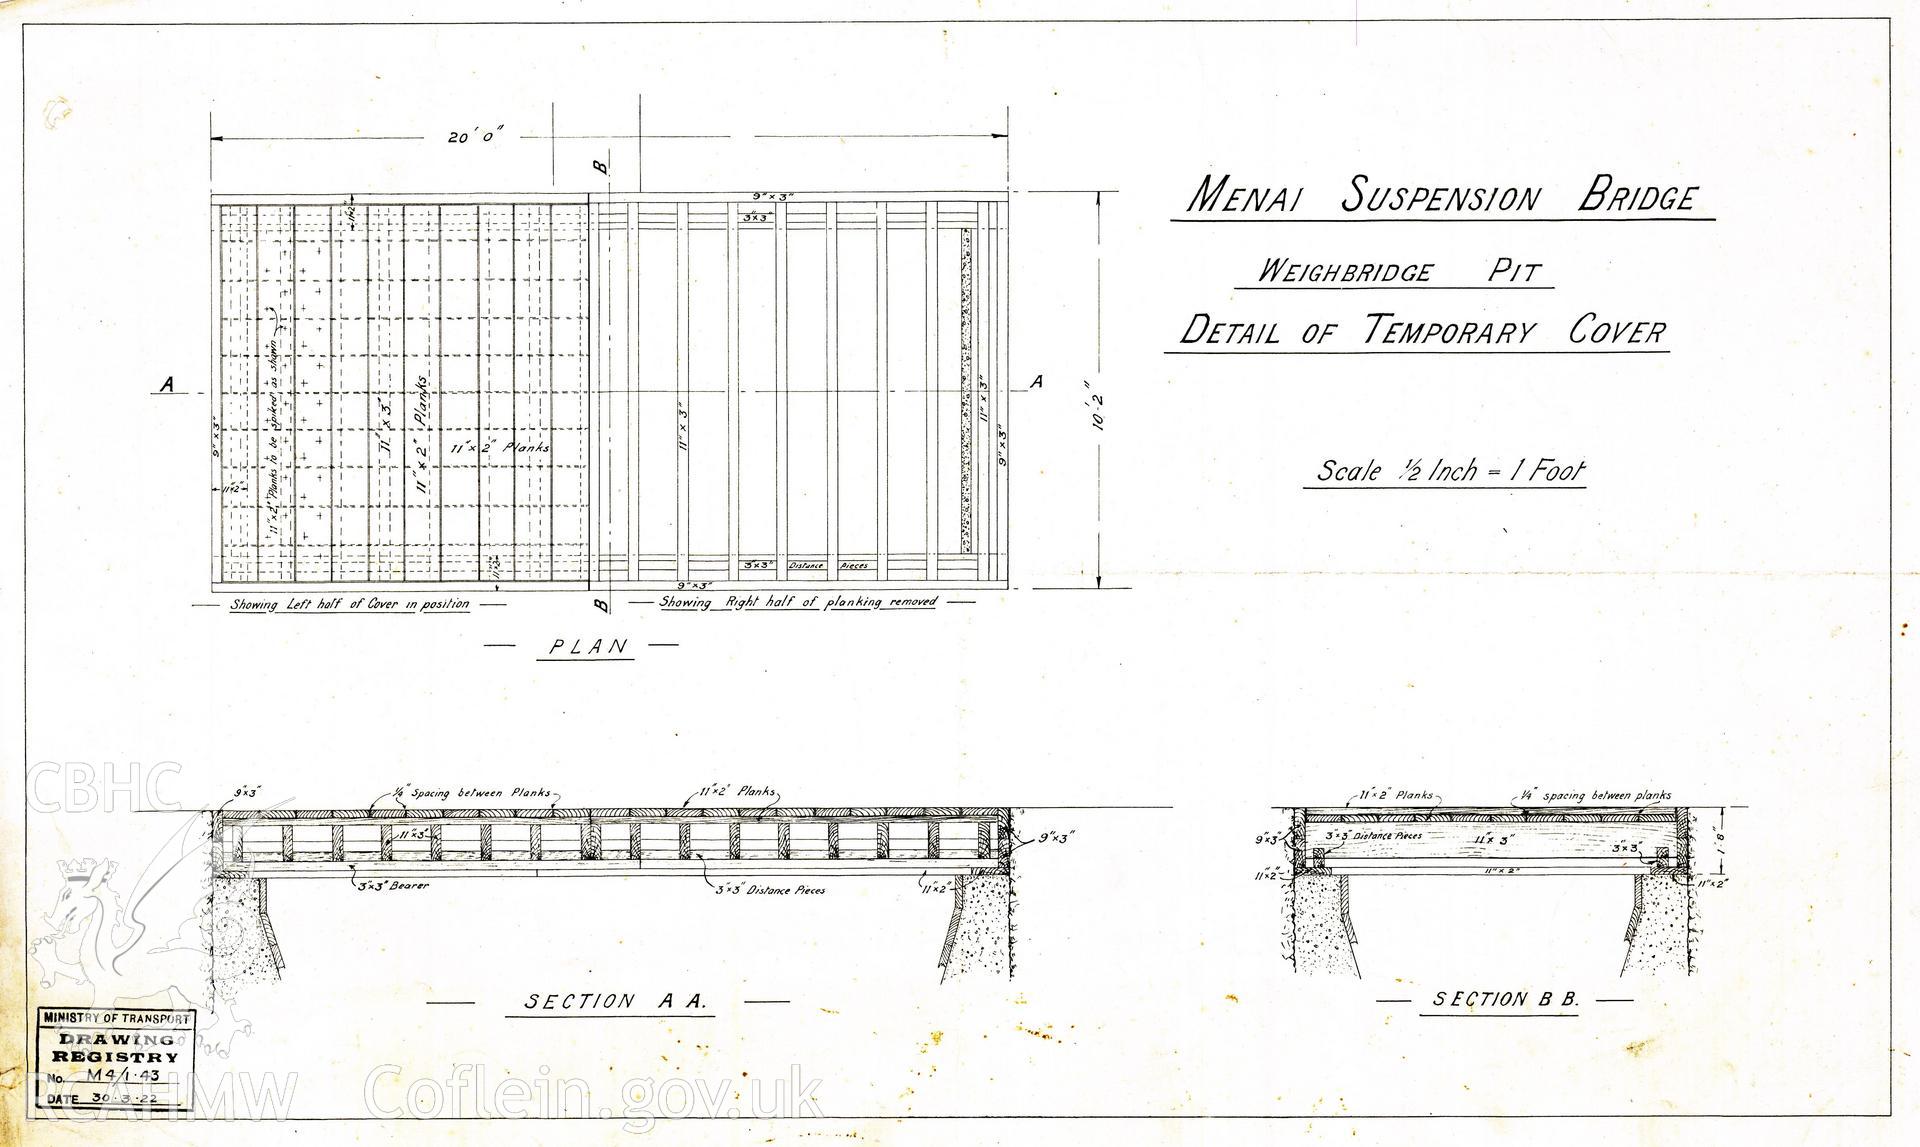 Digital copy of a Ministry of Works drawing of Menai Suspension Bridge, Weighbridge Pit, detail of temporary cover,  Ref No. M4/1.43